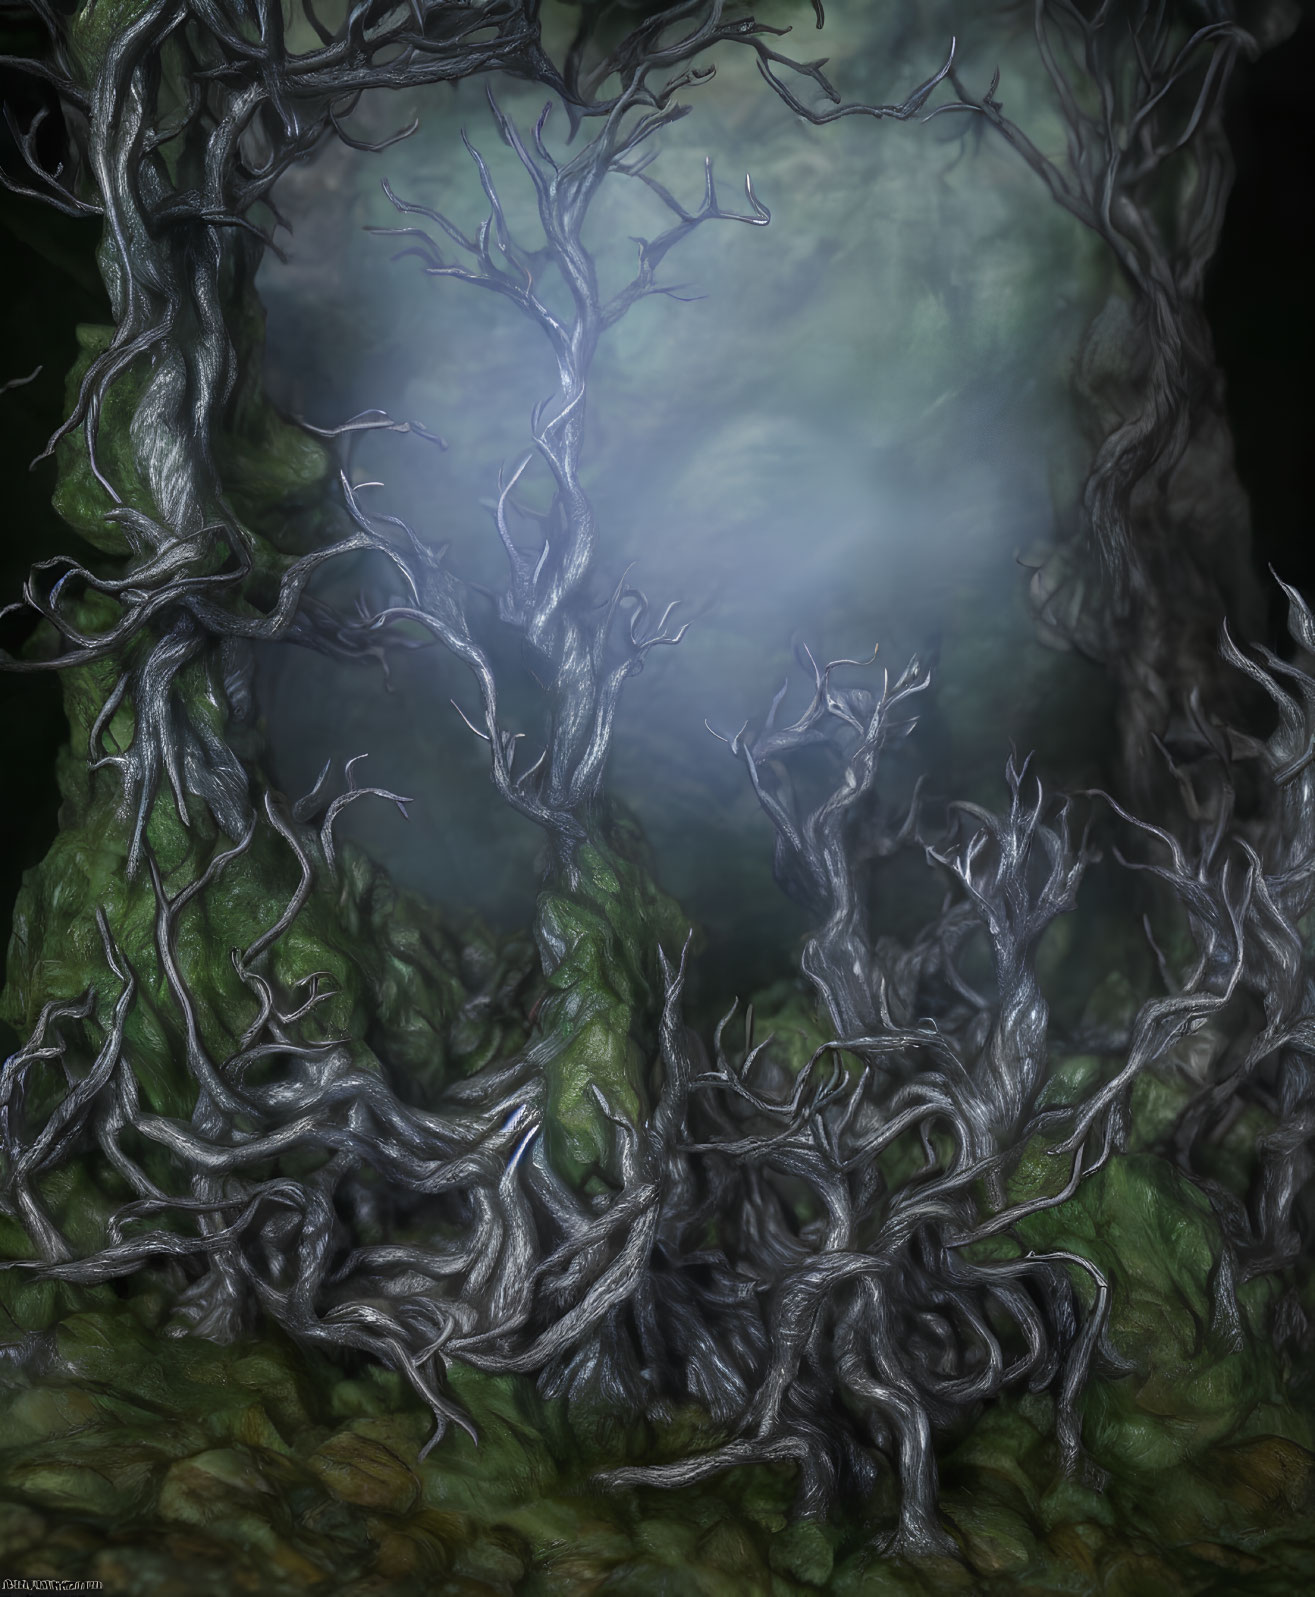 Mysterious forest scene with twisted tree roots and branches